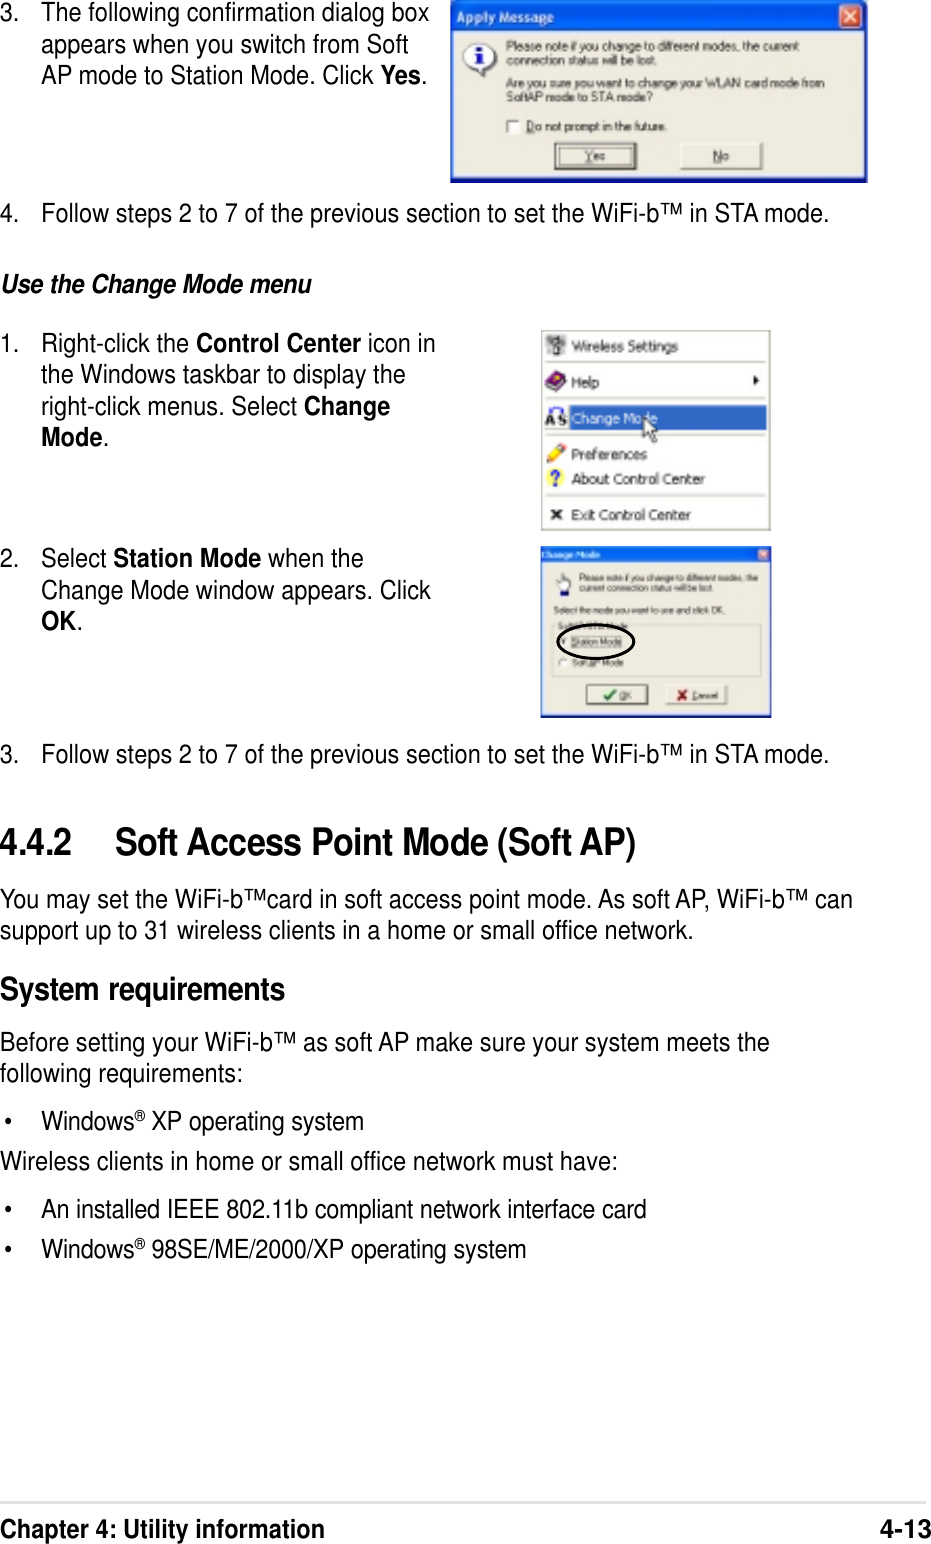 Chapter 4: Utility information4-134.4.2 Soft Access Point Mode (Soft AP)You may set the WiFi-b™card in soft access point mode. As soft AP, WiFi-b™ cansupport up to 31 wireless clients in a home or small office network.System requirementsBefore setting your WiFi-b™ as soft AP make sure your system meets thefollowing requirements:•Windows® XP operating systemWireless clients in home or small office network must have:•An installed IEEE 802.11b compliant network interface card•Windows® 98SE/ME/2000/XP operating systemUse the Change Mode menu1. Right-click the Control Center icon inthe Windows taskbar to display theright-click menus. Select ChangeMode.3. Follow steps 2 to 7 of the previous section to set the WiFi-b™ in STA mode.3. The following confirmation dialog boxappears when you switch from SoftAP mode to Station Mode. Click Yes.2. Select Station Mode when theChange Mode window appears. ClickOK.4. Follow steps 2 to 7 of the previous section to set the WiFi-b™ in STA mode.